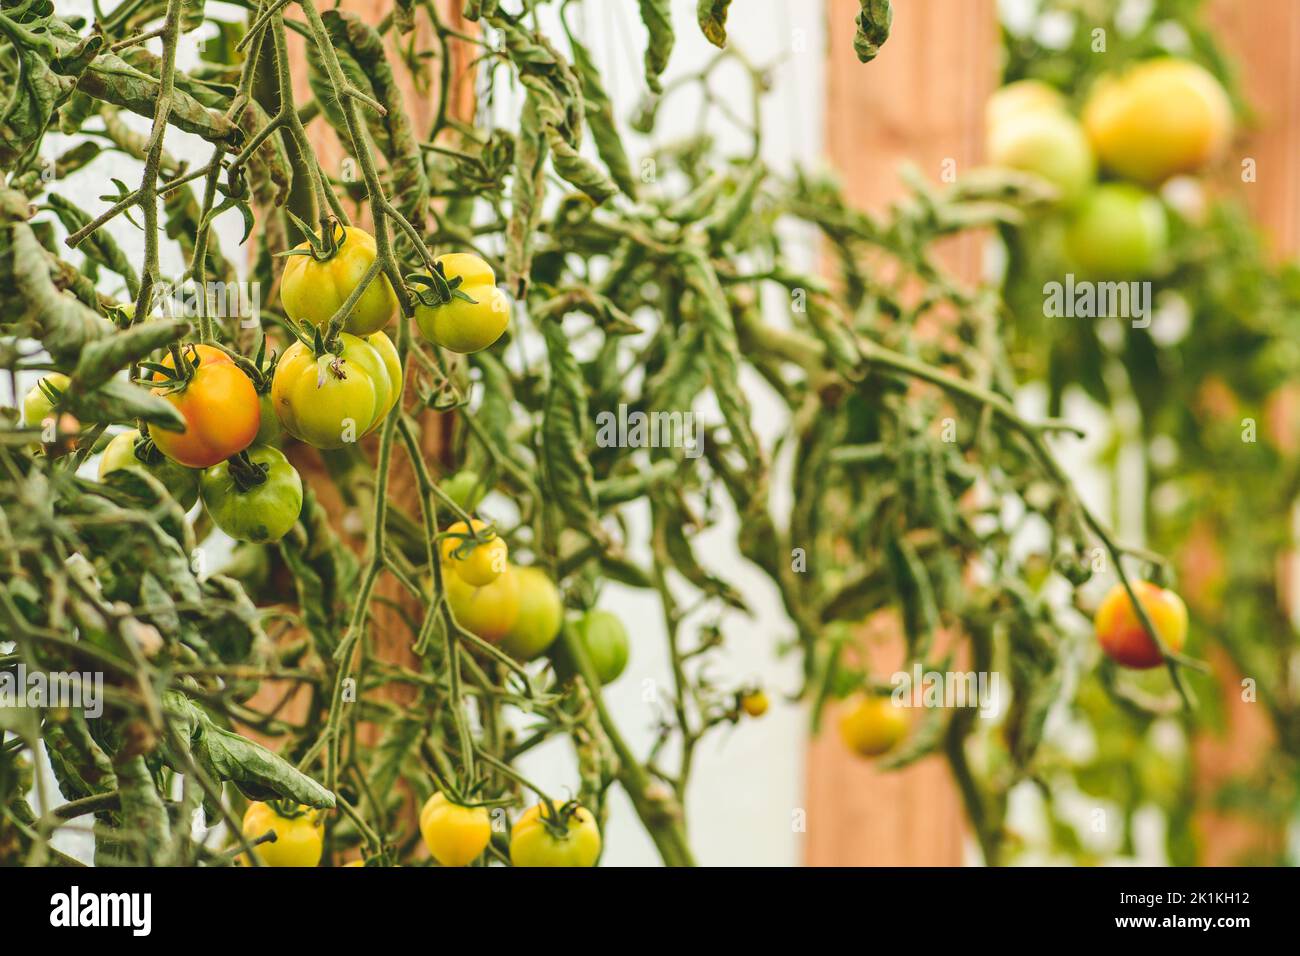 Fresh bio unripe bunch of hanging green tomatoes in a wooden rustic greenhouse, close up. Concept of biological agriculture, bio product, bio ecology Stock Photo